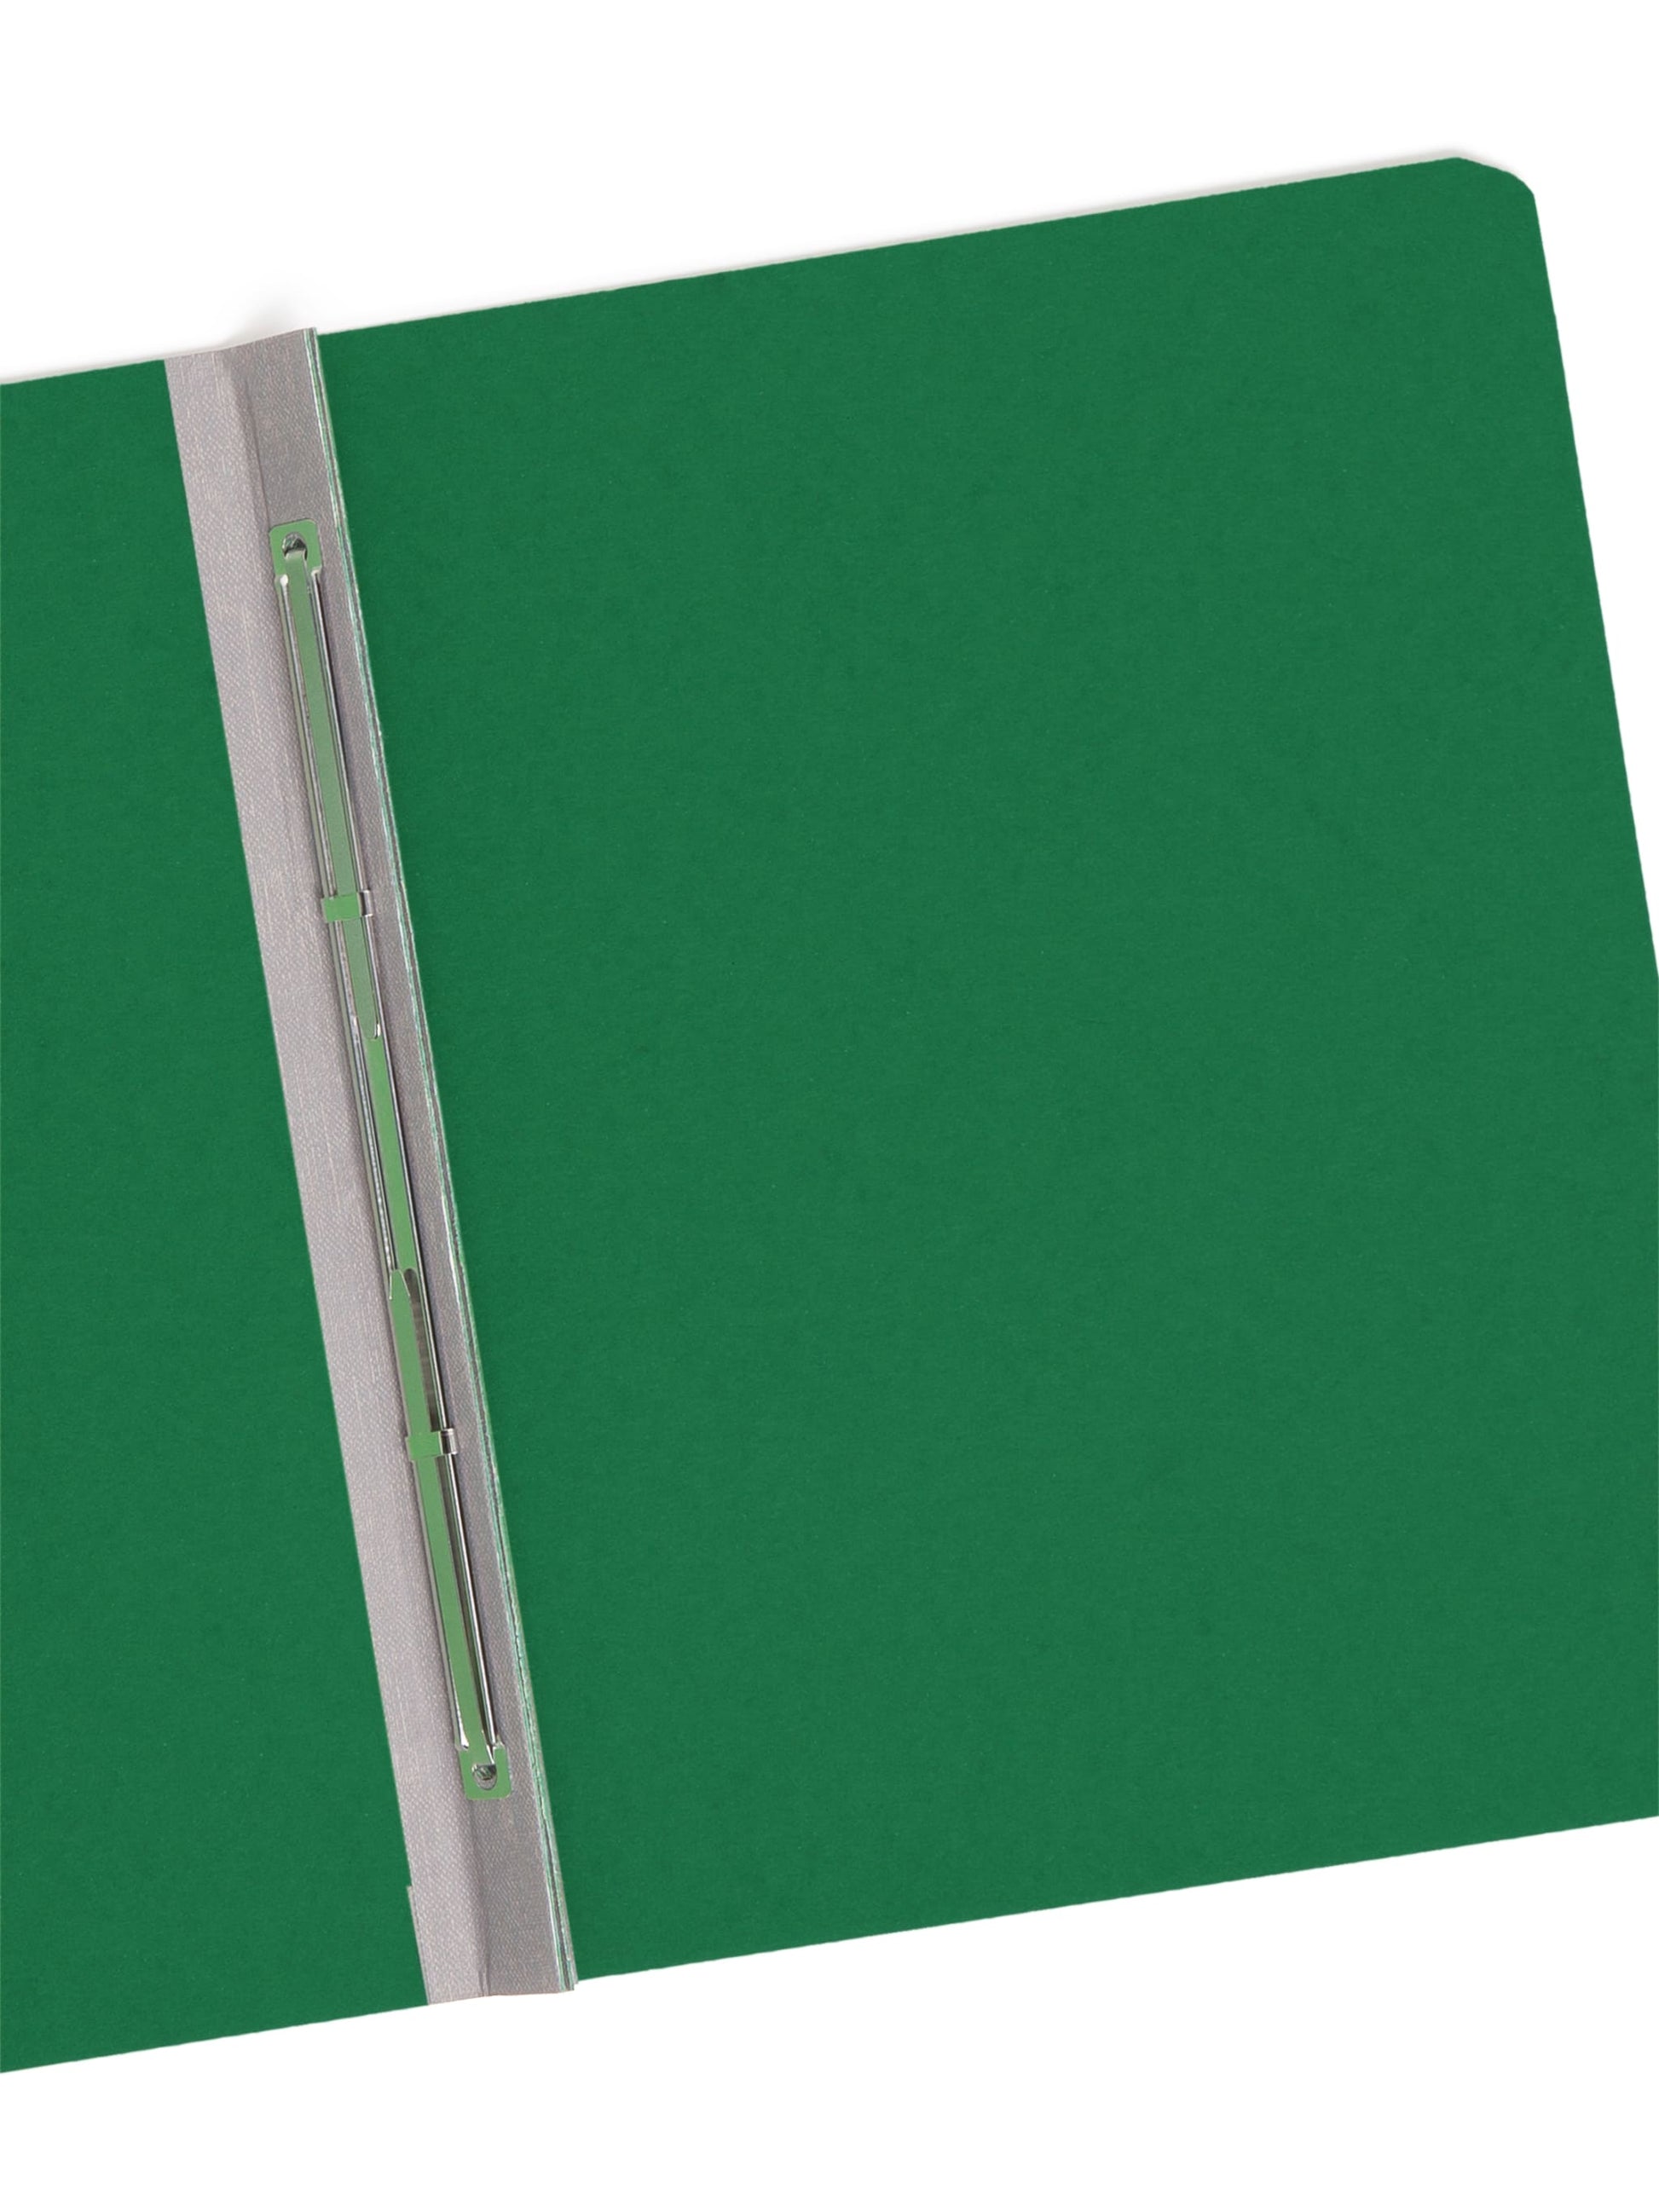 Premium Pressboard Report Covers, 8 1/2-inch Metal Prong Side Fastener with Compressor, 3-inch Expansion, Green Color, Letter Size, Set of 1, 086486814522